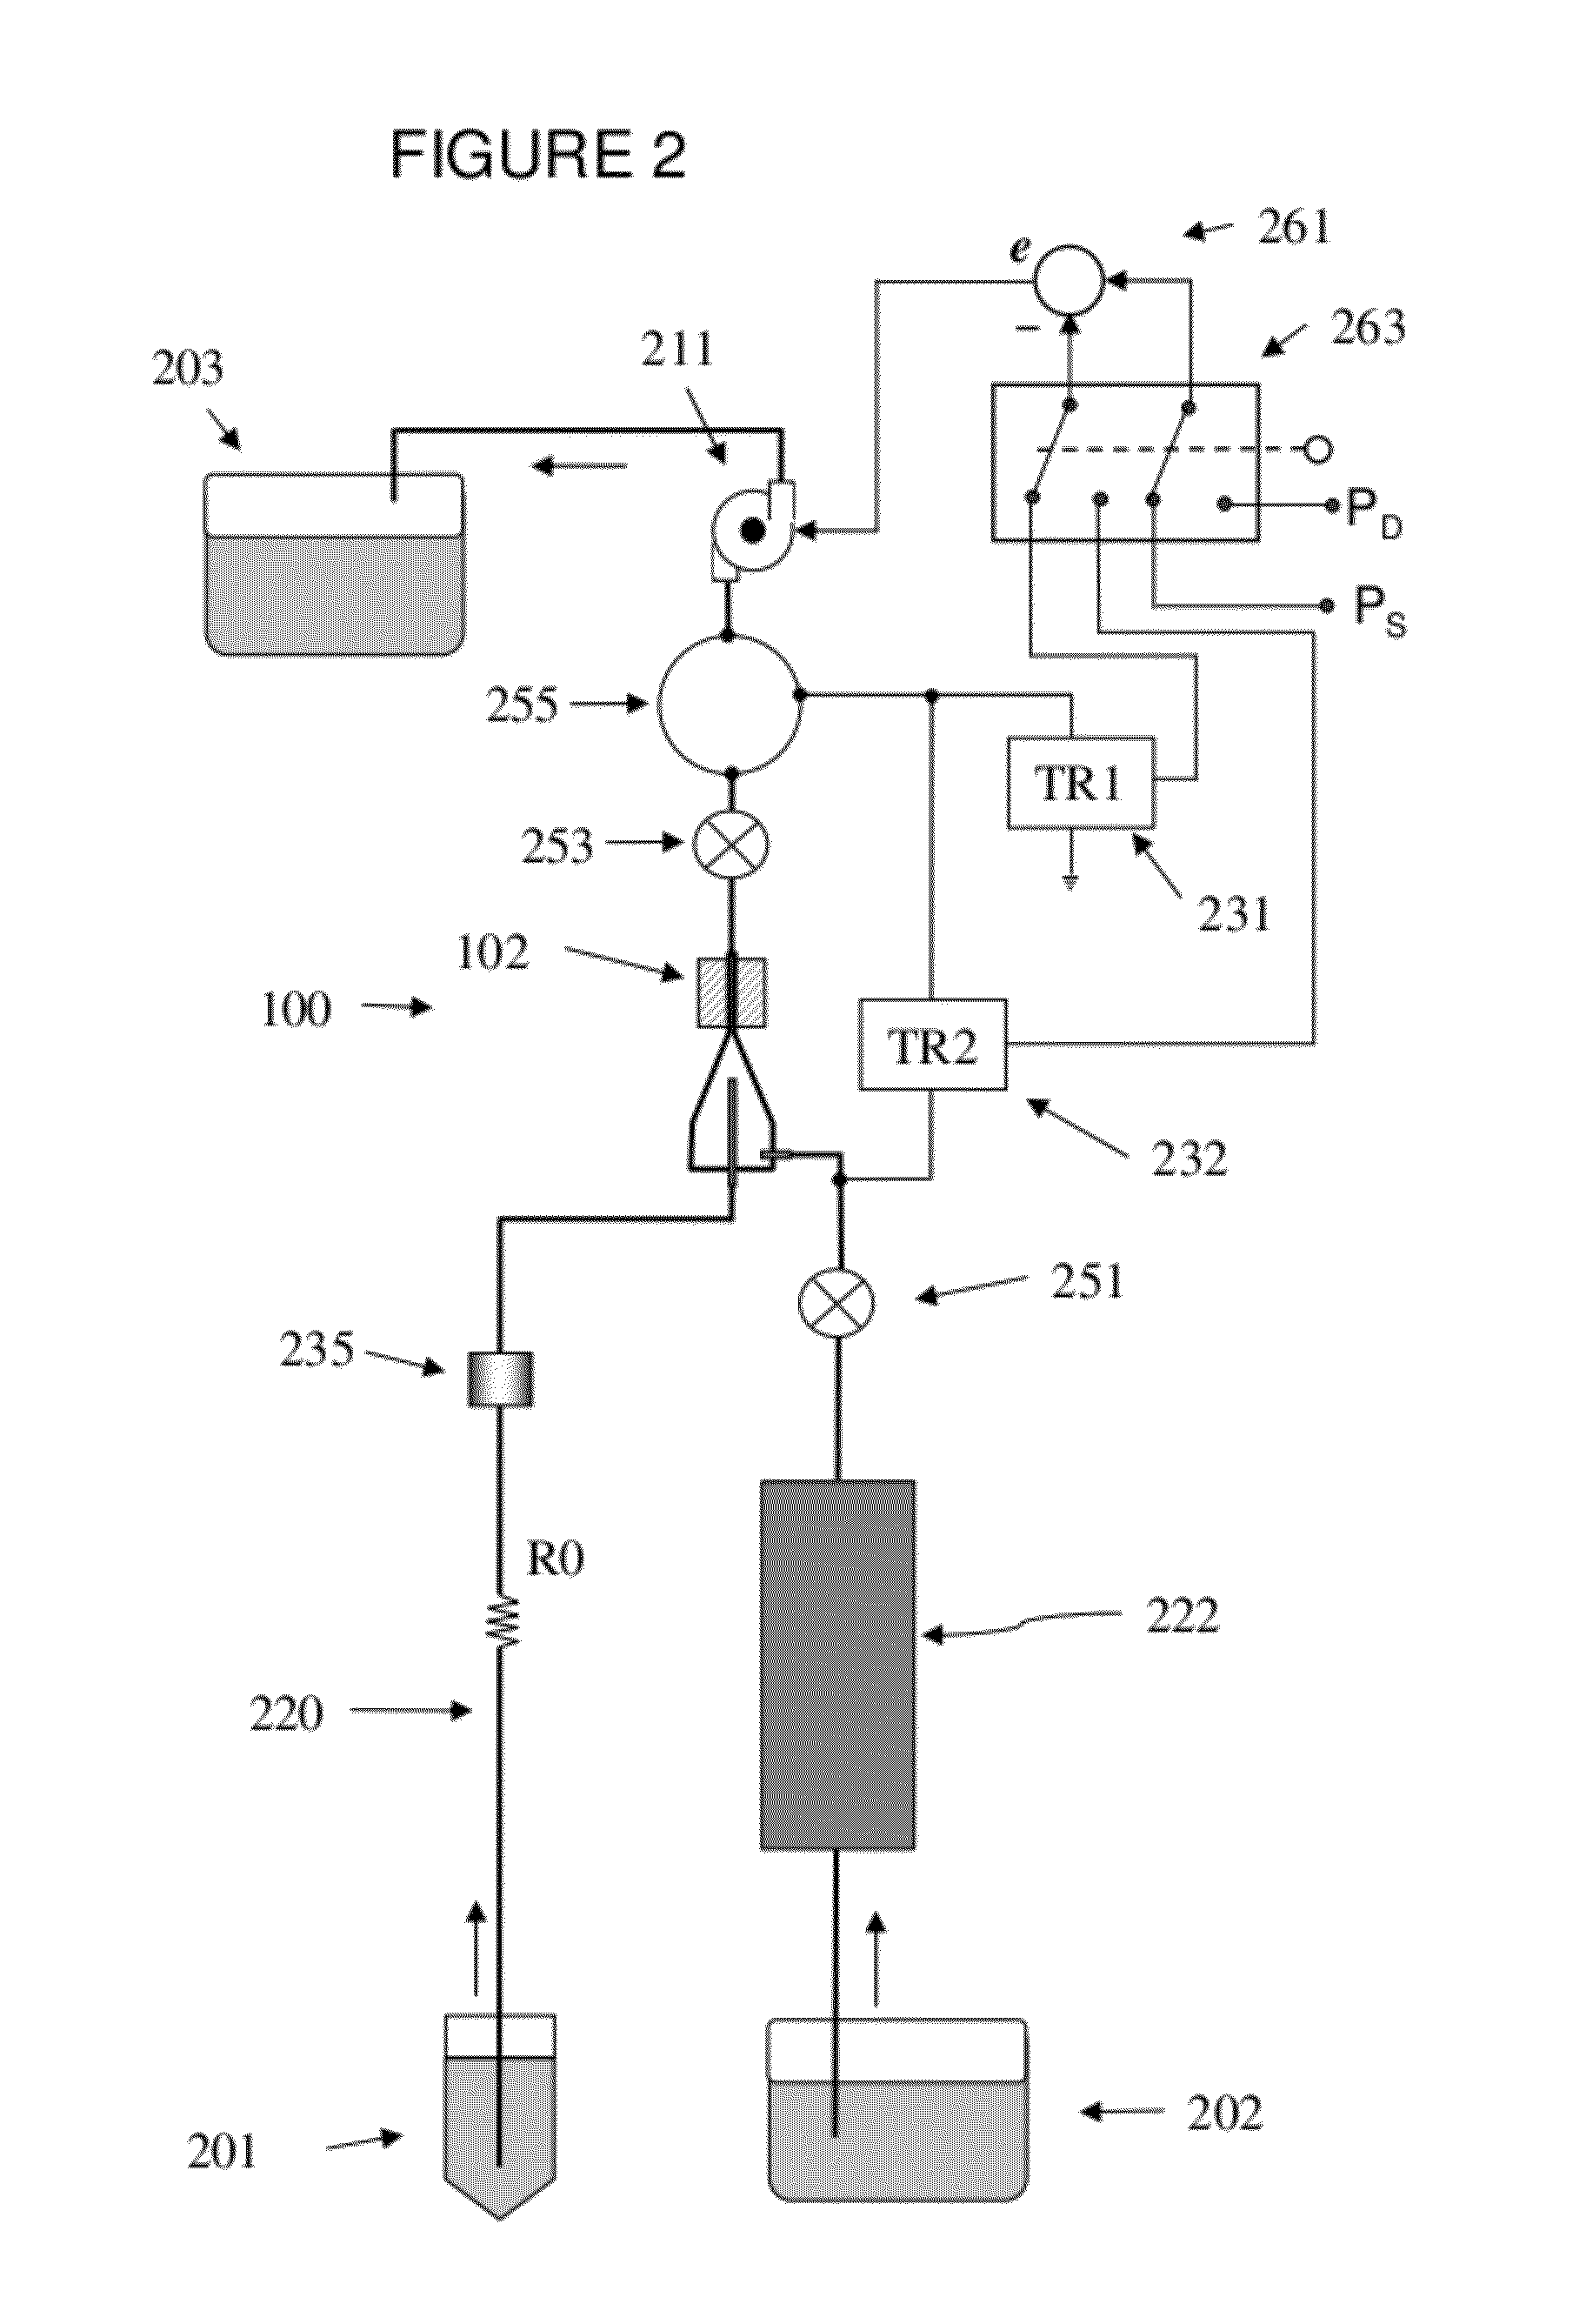 Dual feedback vacuum fluidics for a flow-type particle analyzer